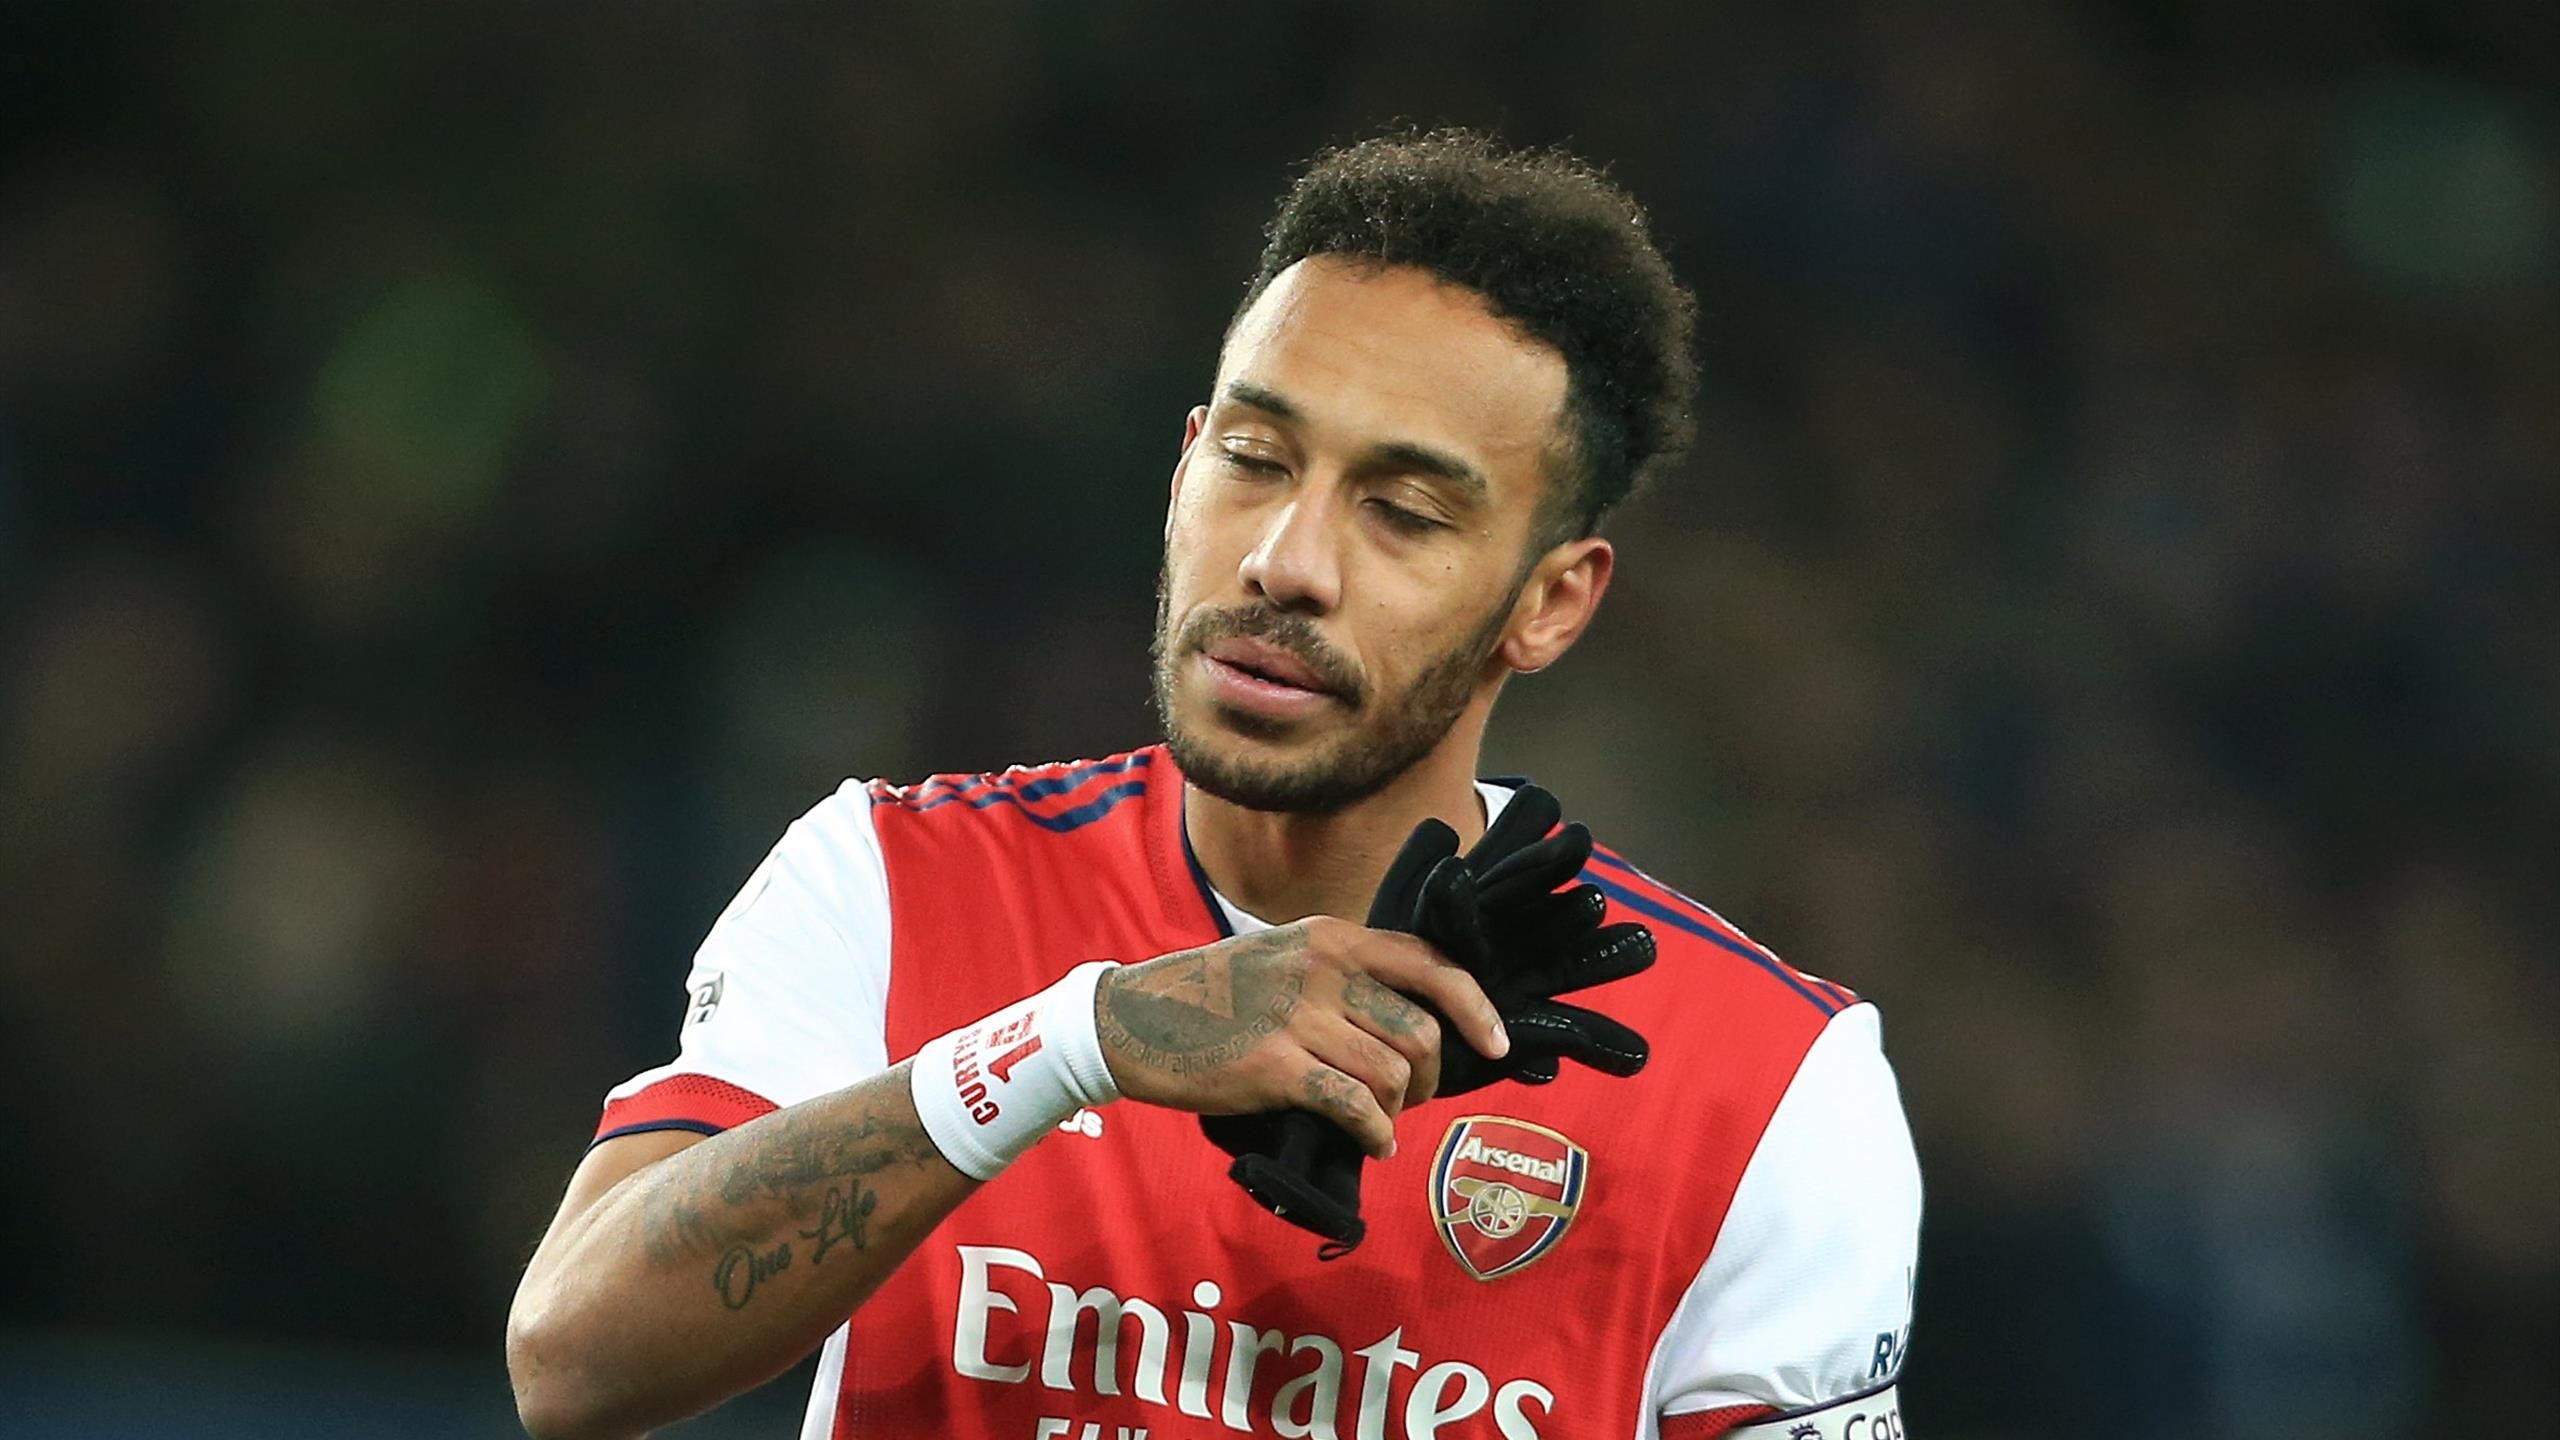 Pierre-Emerick Aubameyang: Barcelona In Serious Talks With The Outcast Arsenal Striker Over a Loan Deal